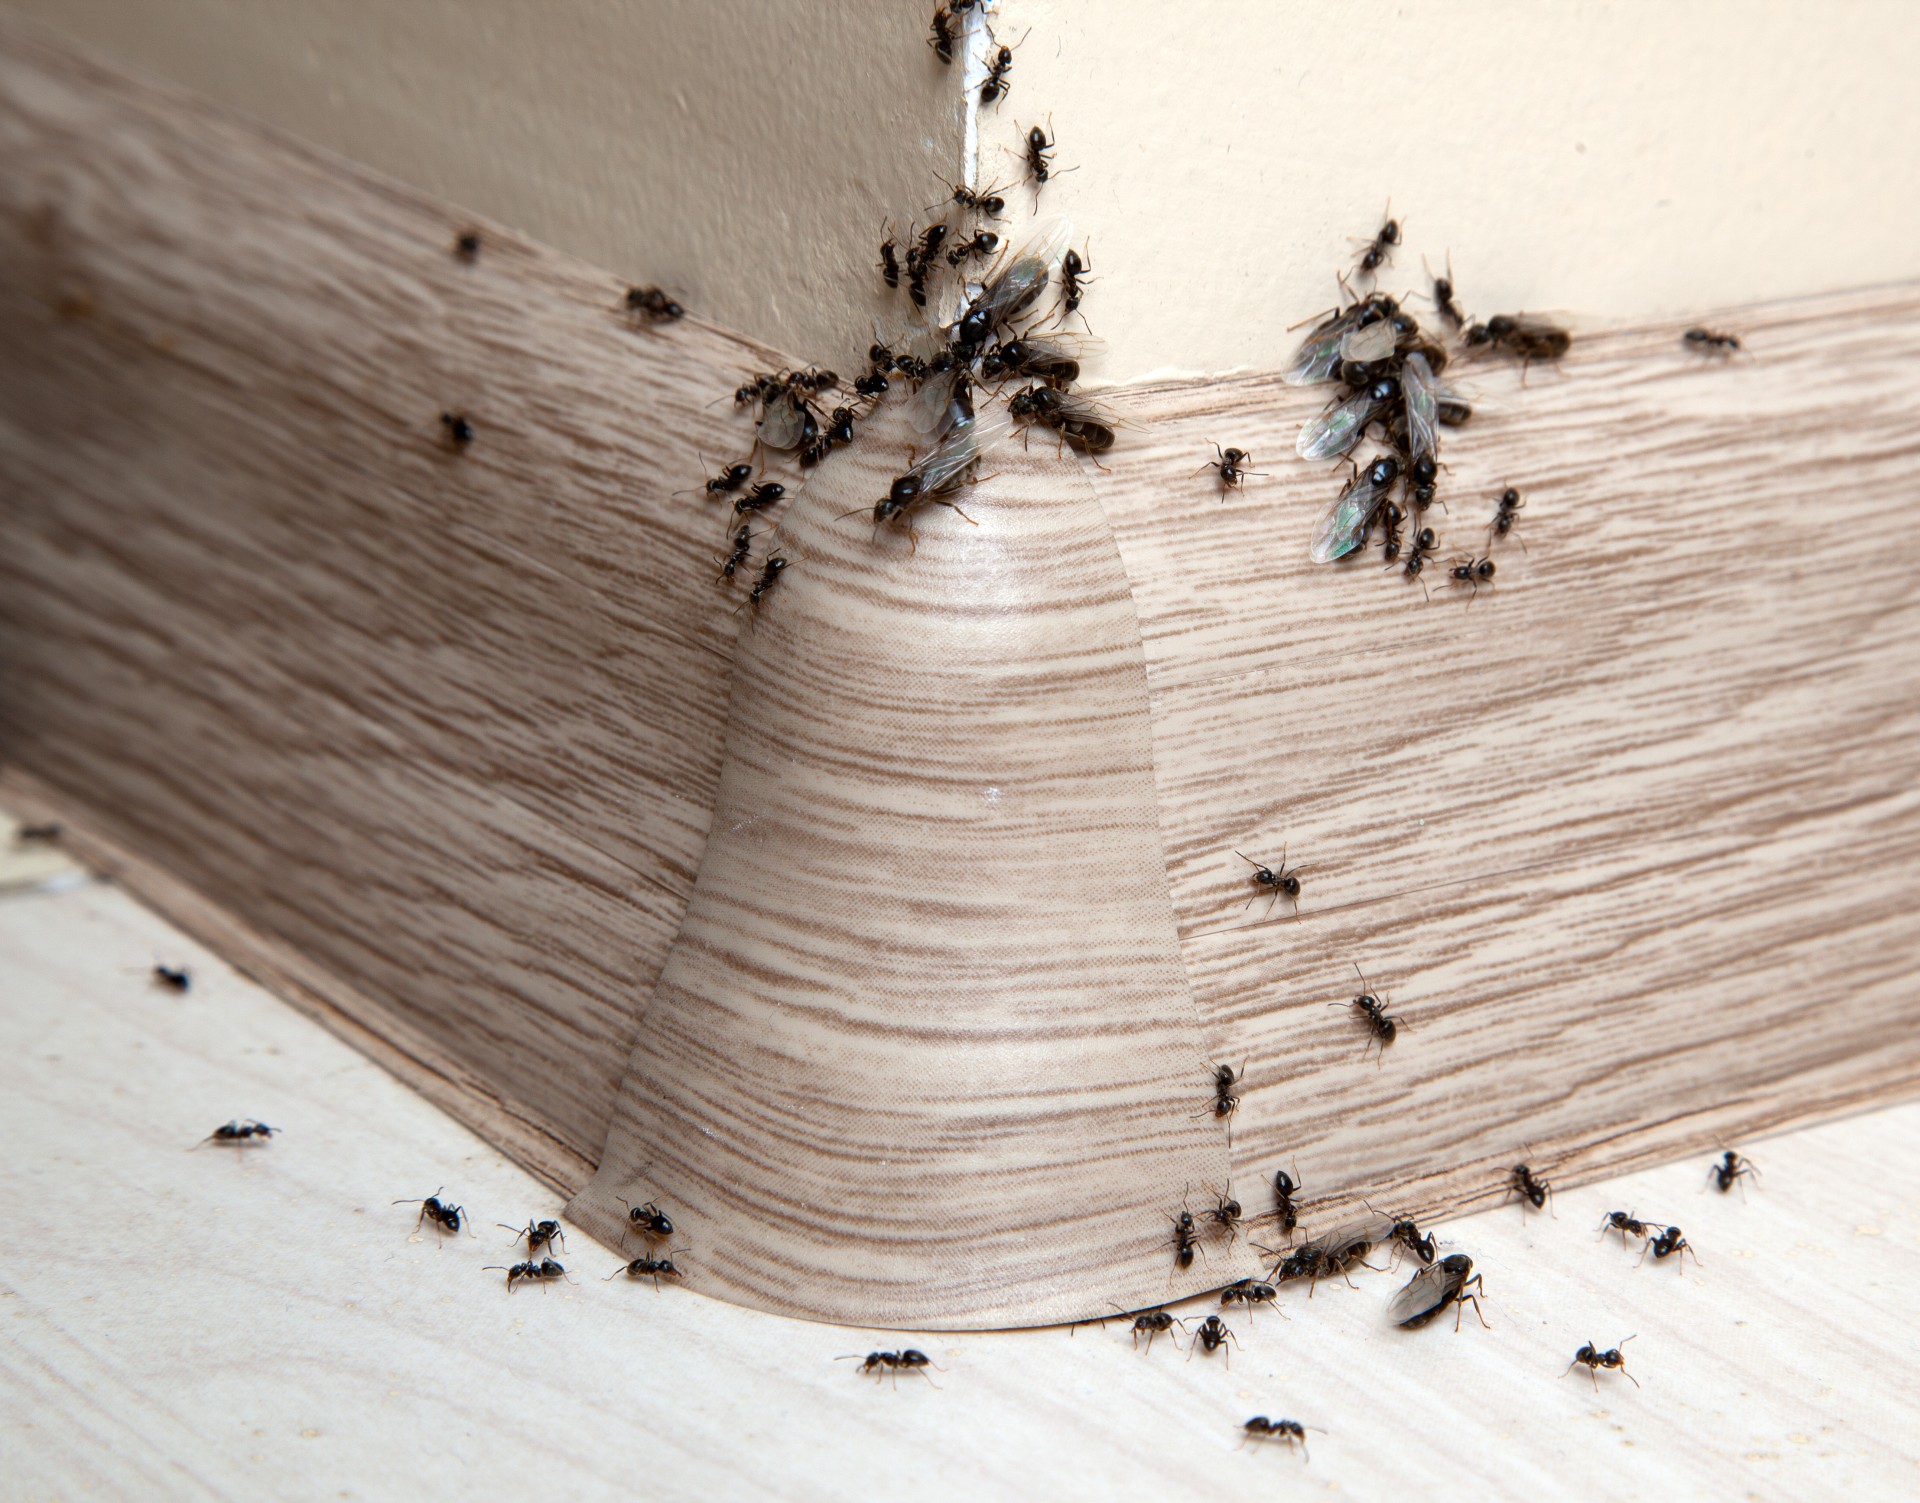 Ant Infestation, Pest Control in Camberwell, SE5. Call Now 020 8166 9746